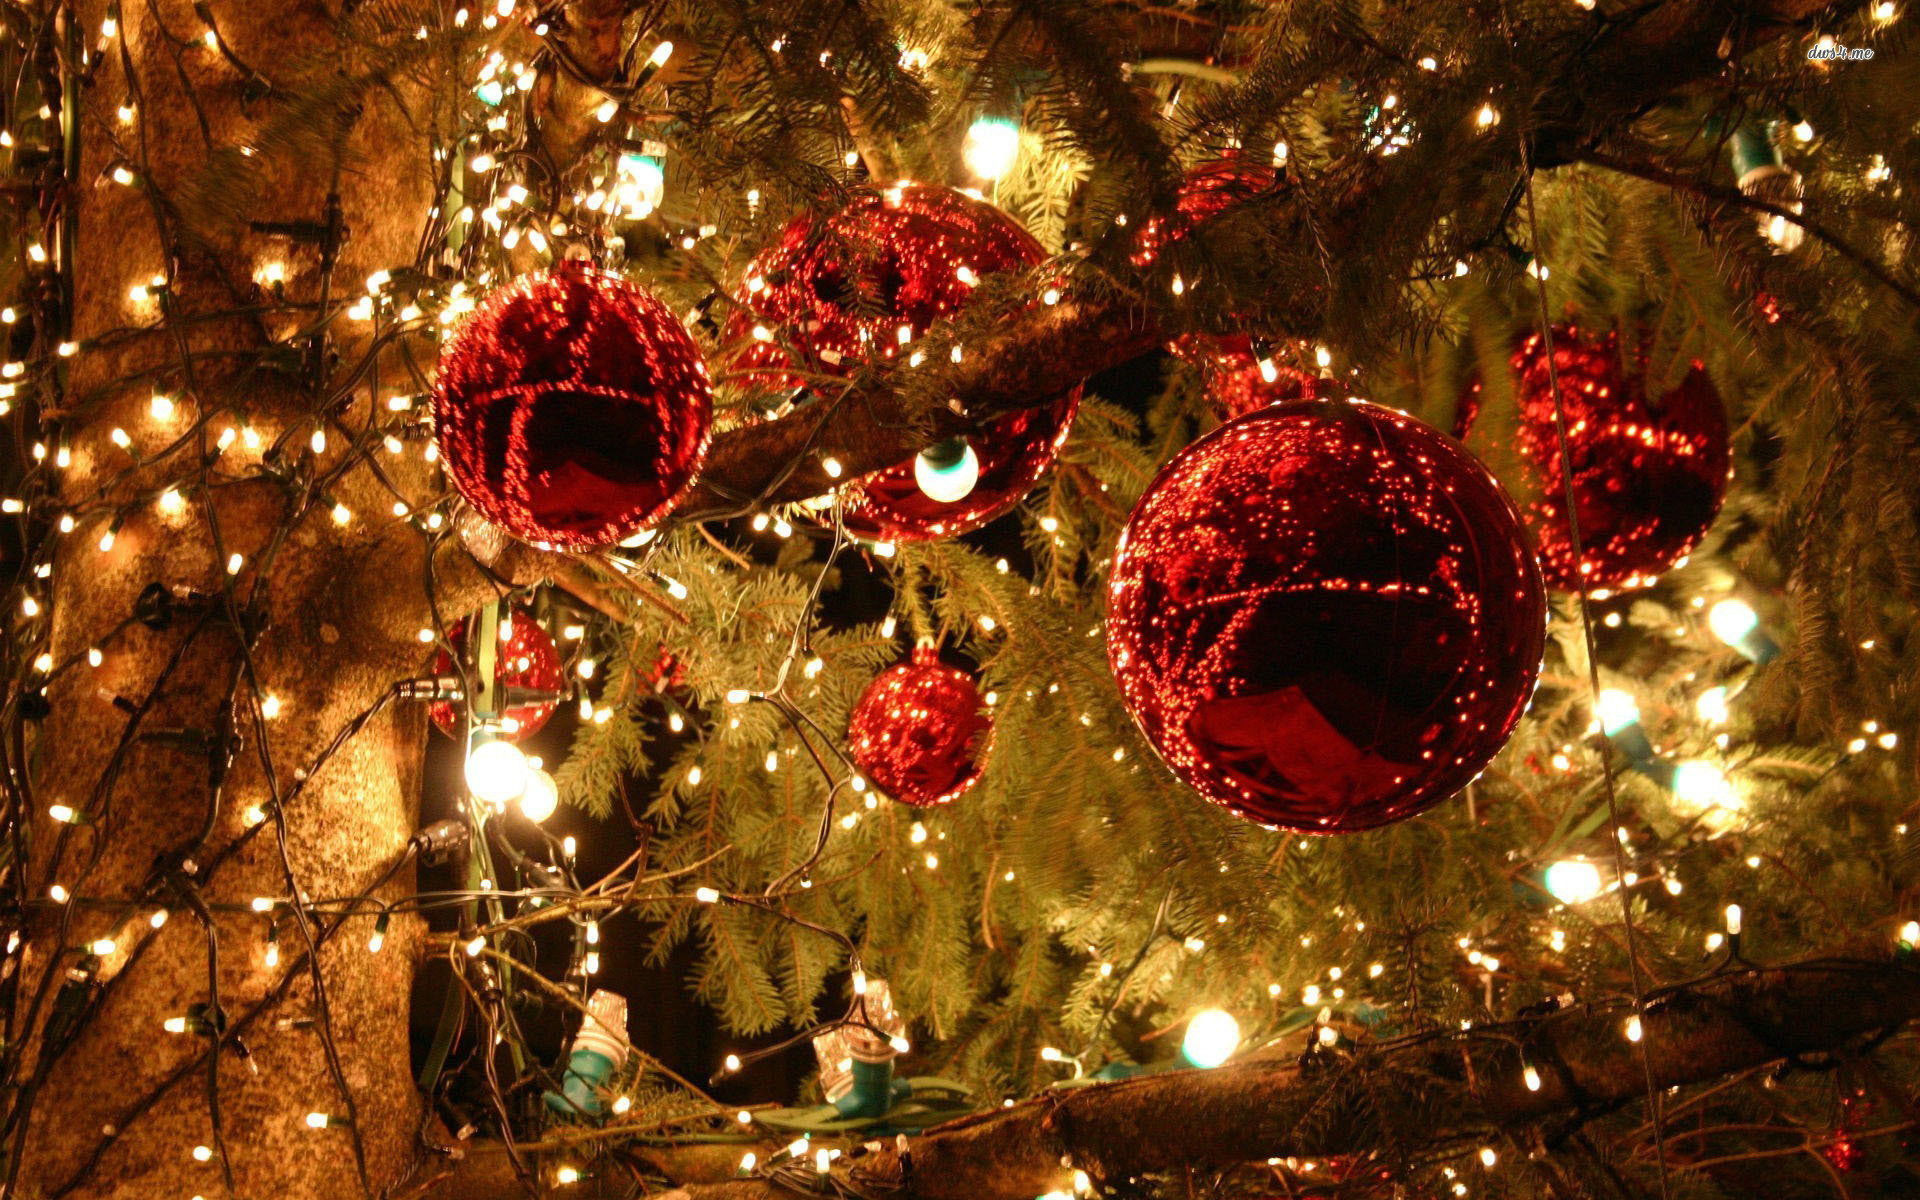 Free Holiday Wallpaper For Computer 85 images in Collection Page 2 1920x1200